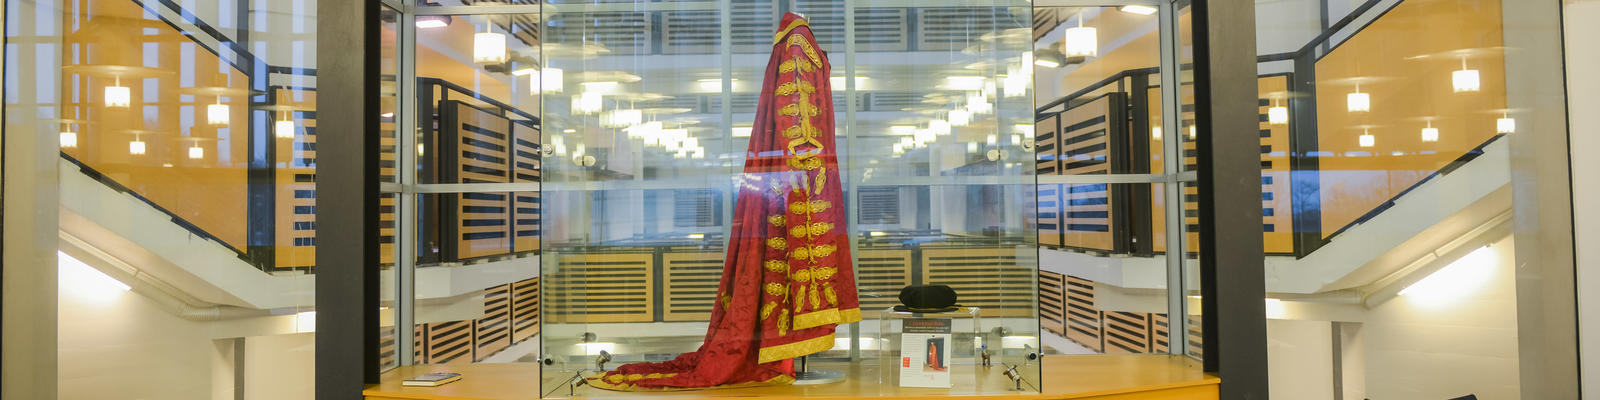 Lancaster University Chancellor's robes in glass cabinet within the Library building